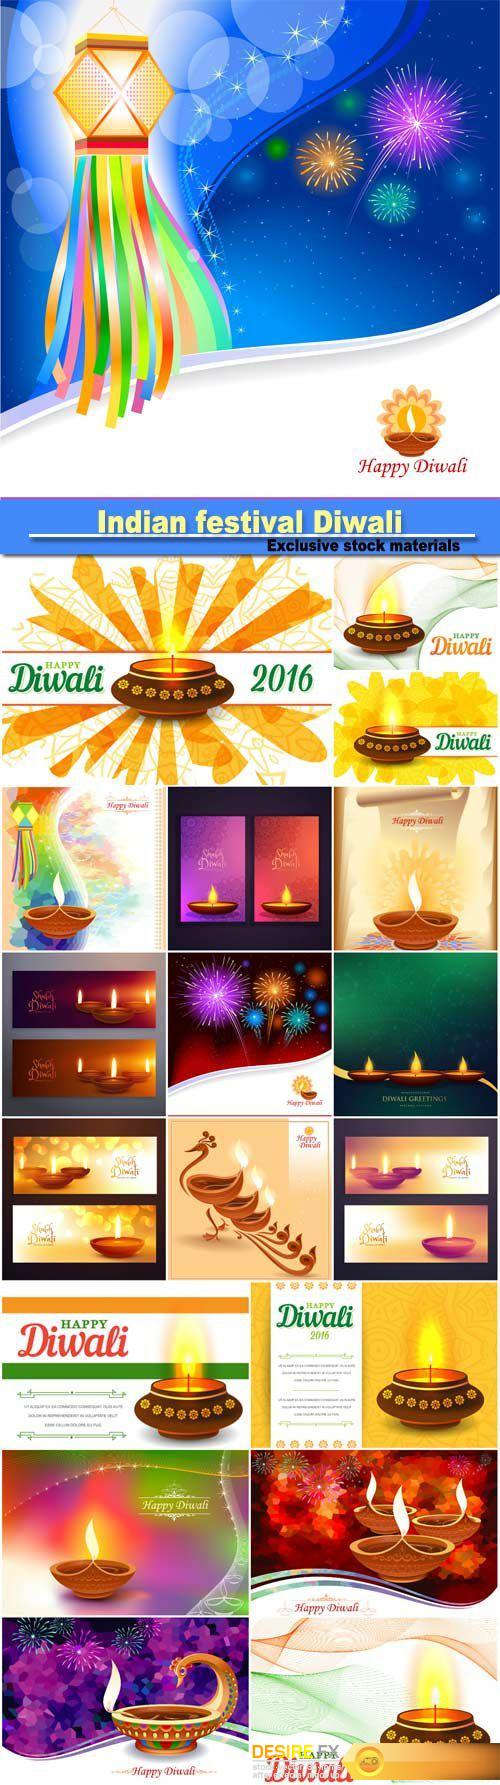 Traditional Indian festival Diwali with lamp vector